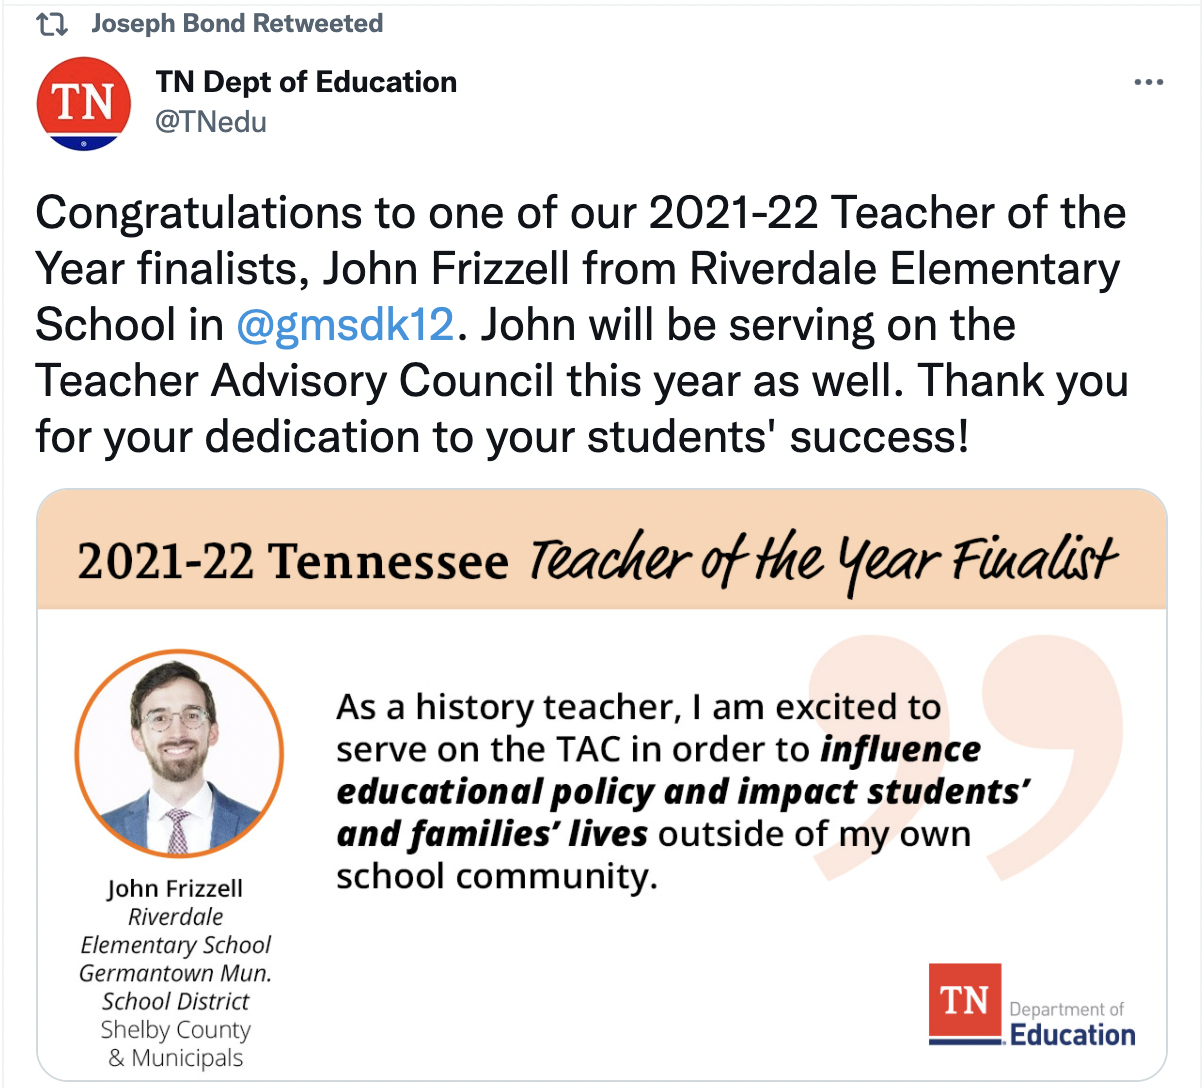 retweeted message from Mr. Bond from TN Dept of Education